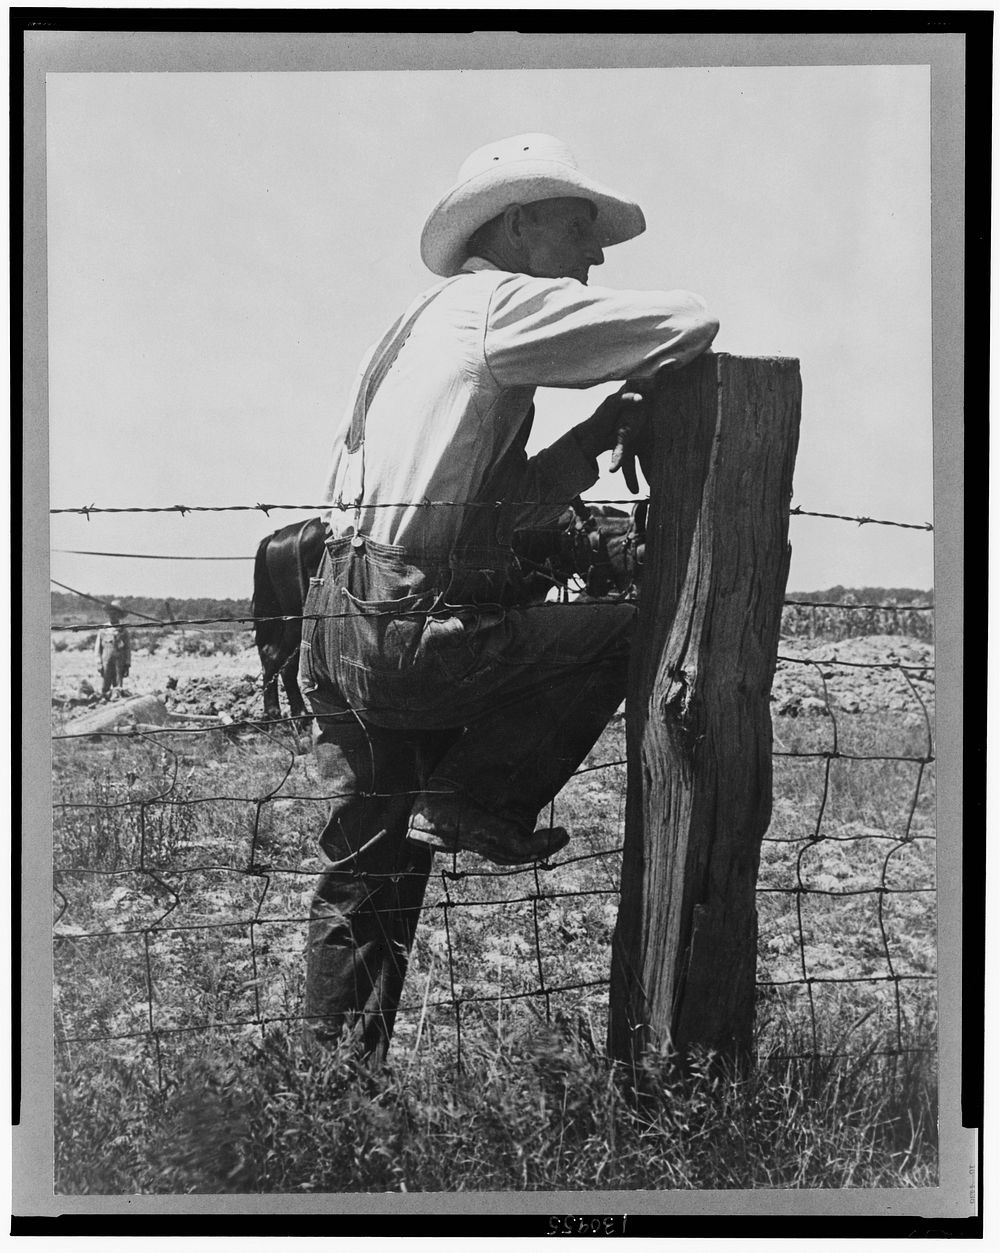 Indiana farmer. Sourced from the Library of Congress.